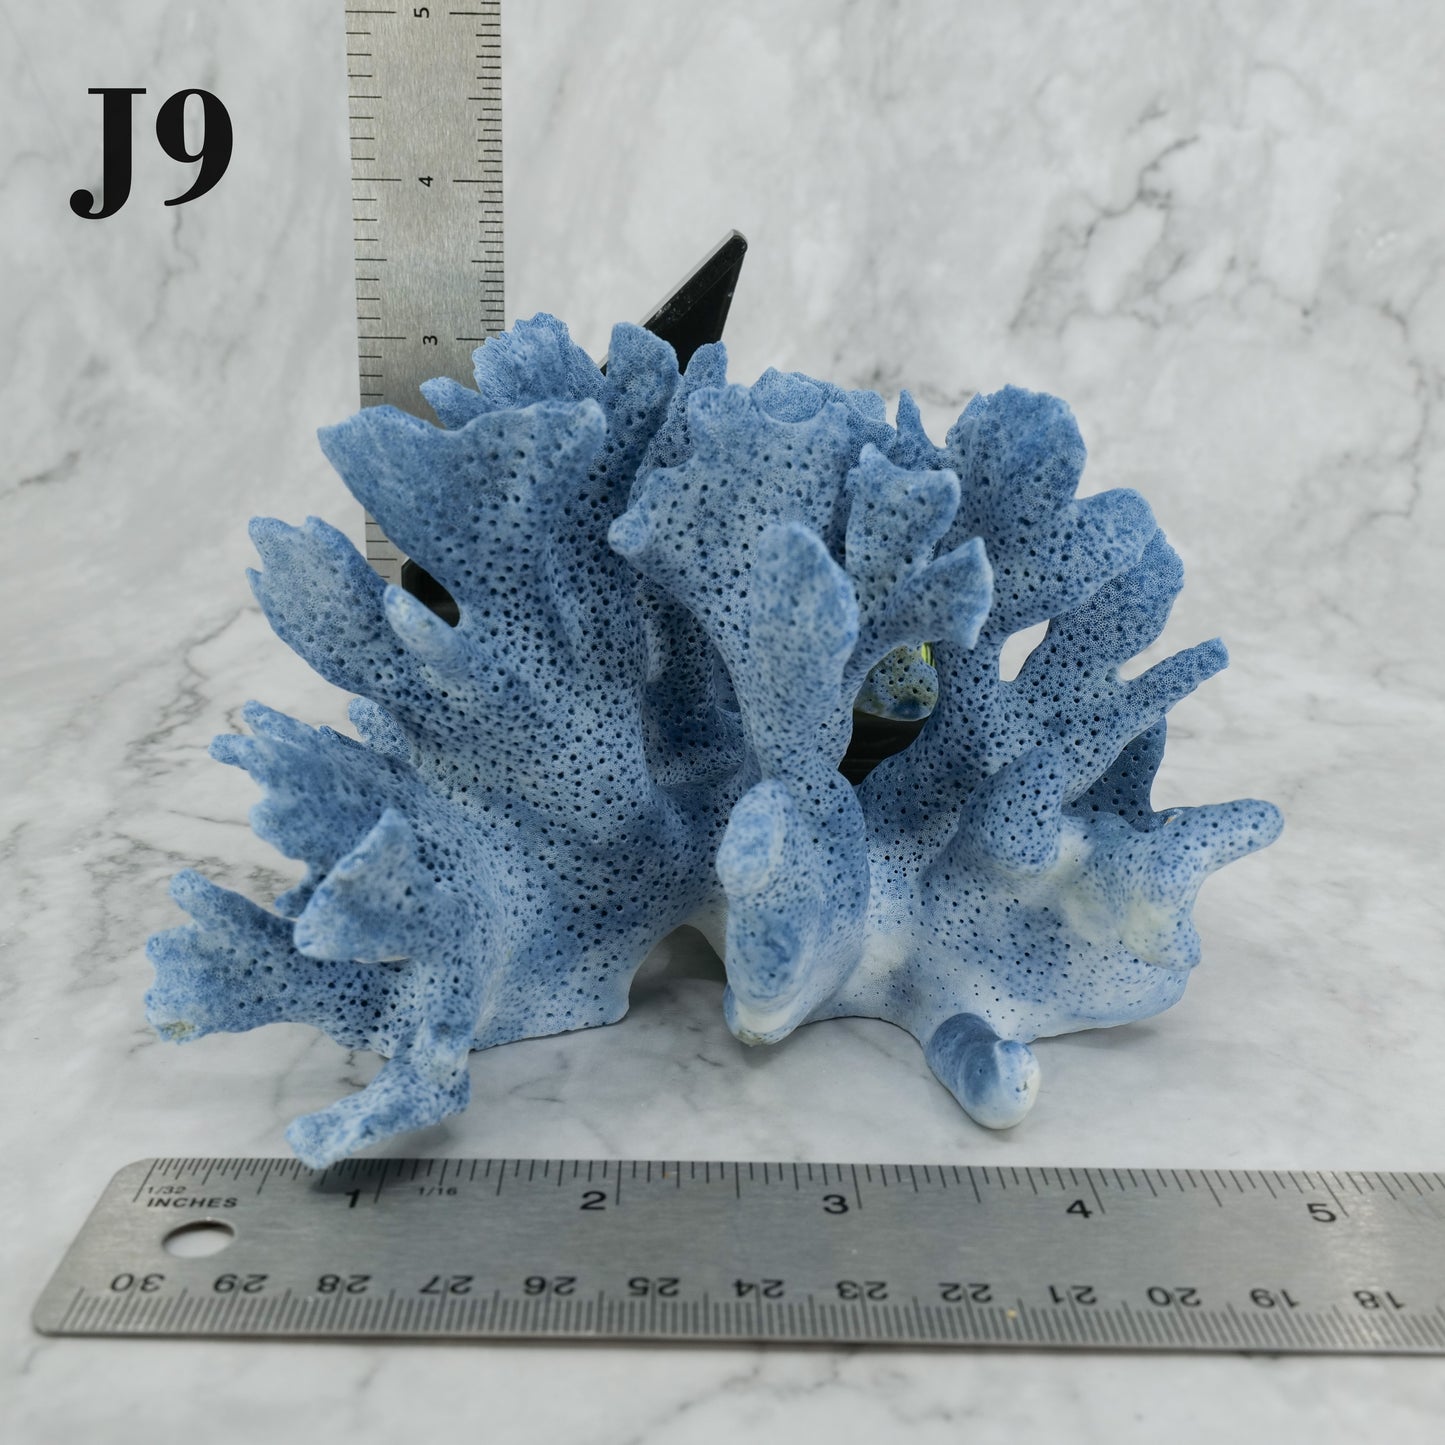 Blue Coral 5-7"